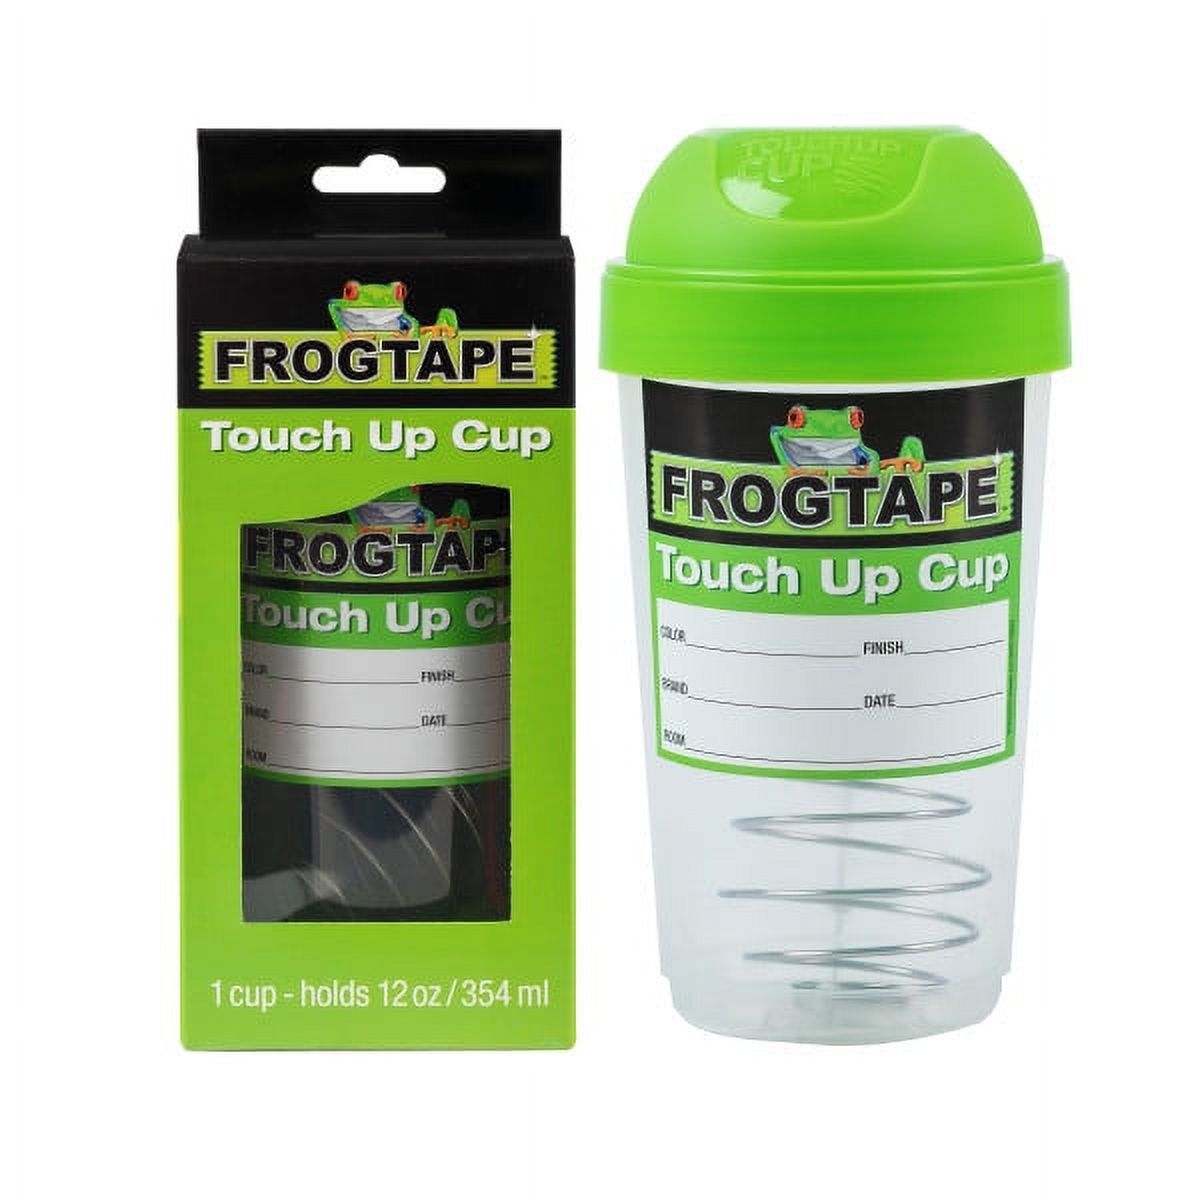 FrogTape Medium Paint Project Prep Pack -- 2 Rolls Multi-Surface Painters Tape, 1.41 in. x 60 yd., Touch up Storage Cup and 3 Drop Cloths - image 2 of 10